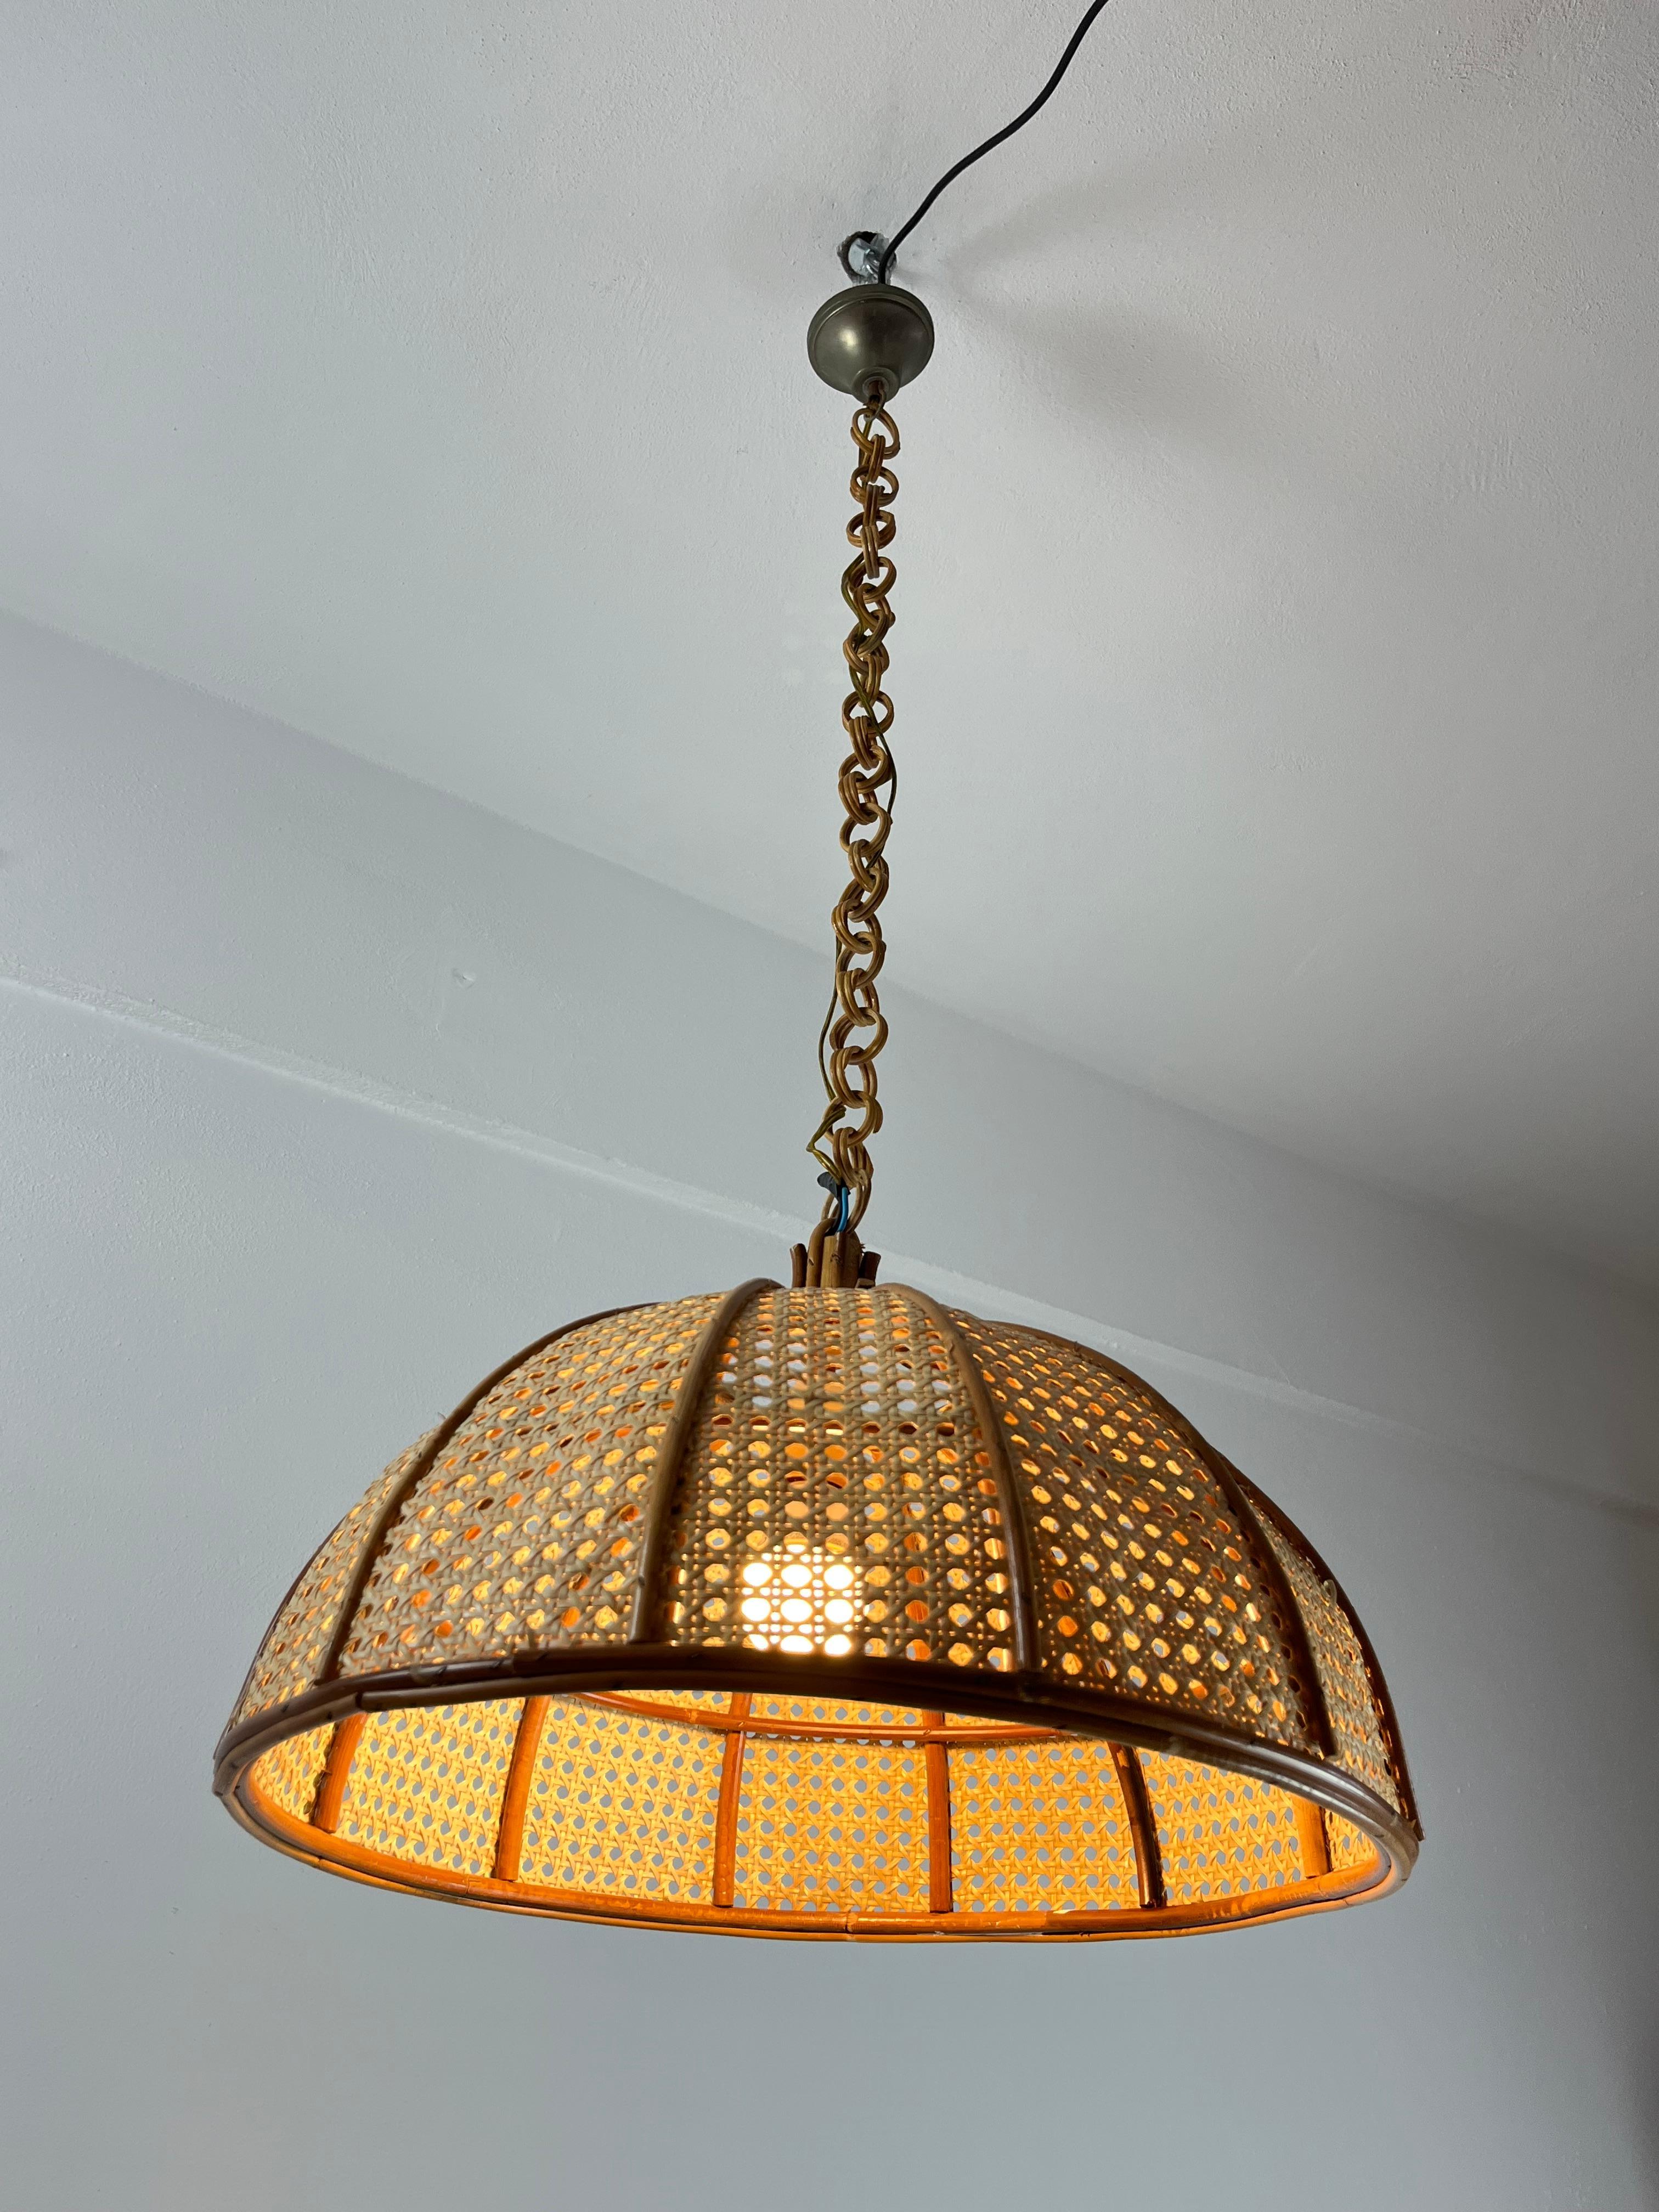 Bamboo and Rattan Pendant Lamp, Italy, 1970s For Sale 1